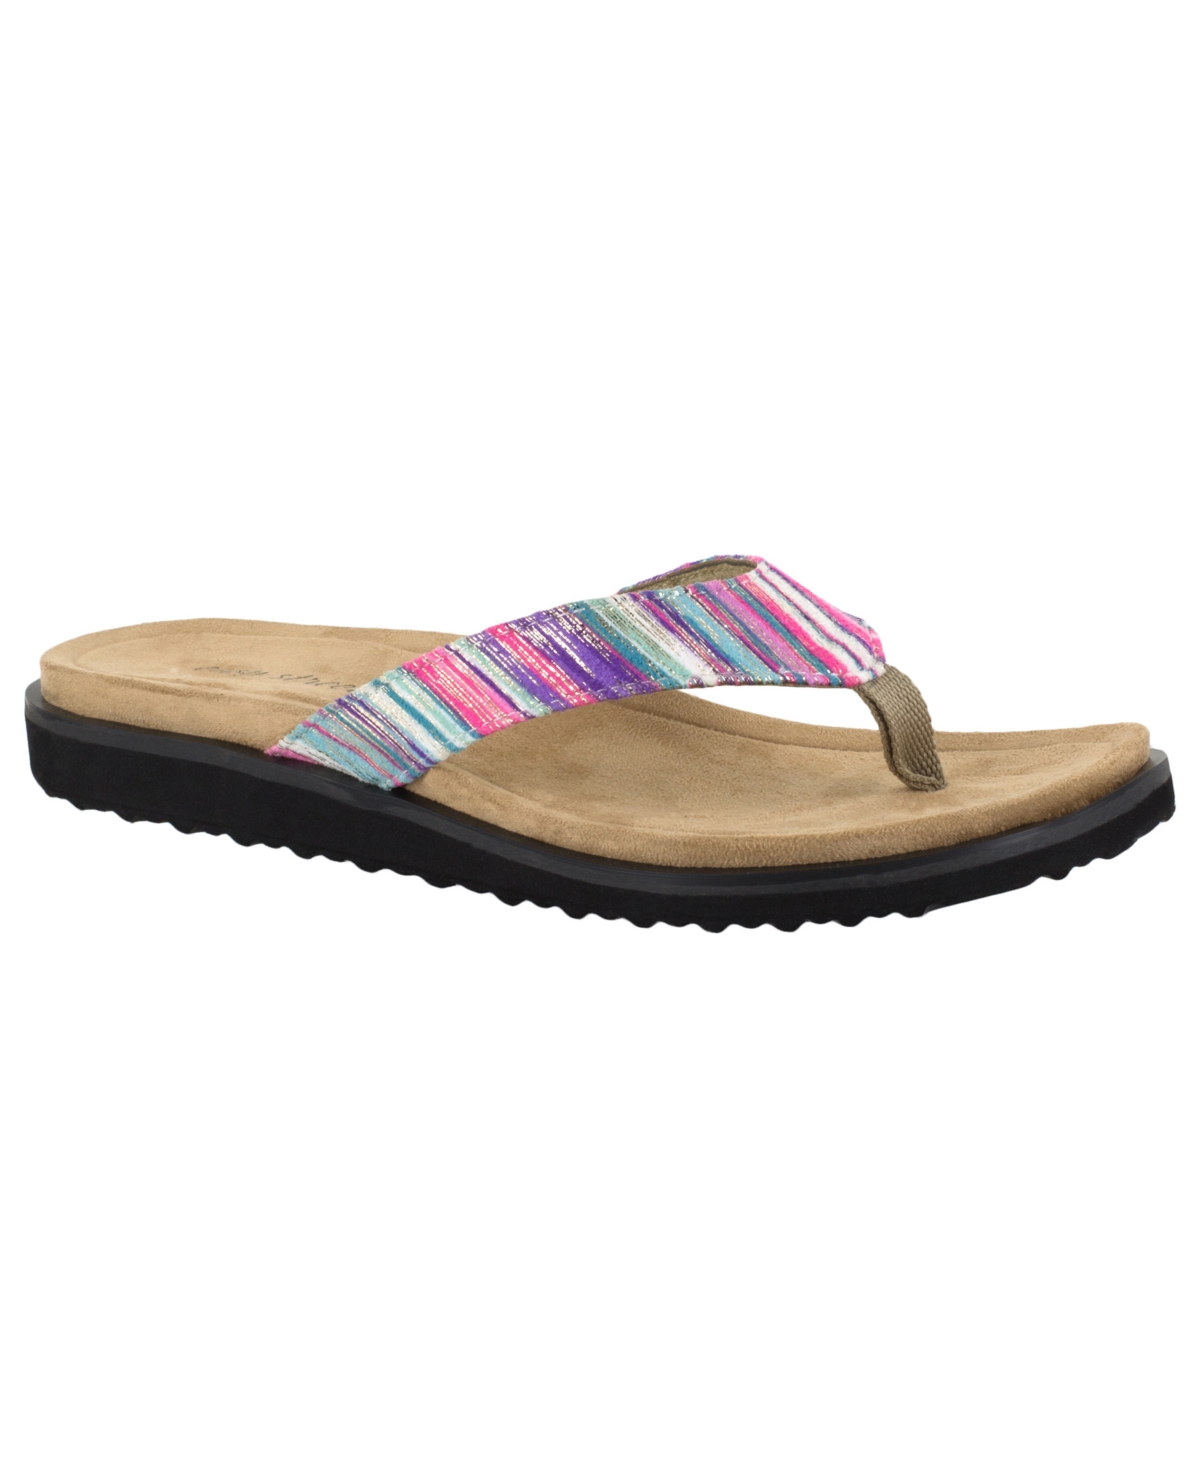 EASY STREET STEVIE THONG SANDALS WOMEN'S SHOES